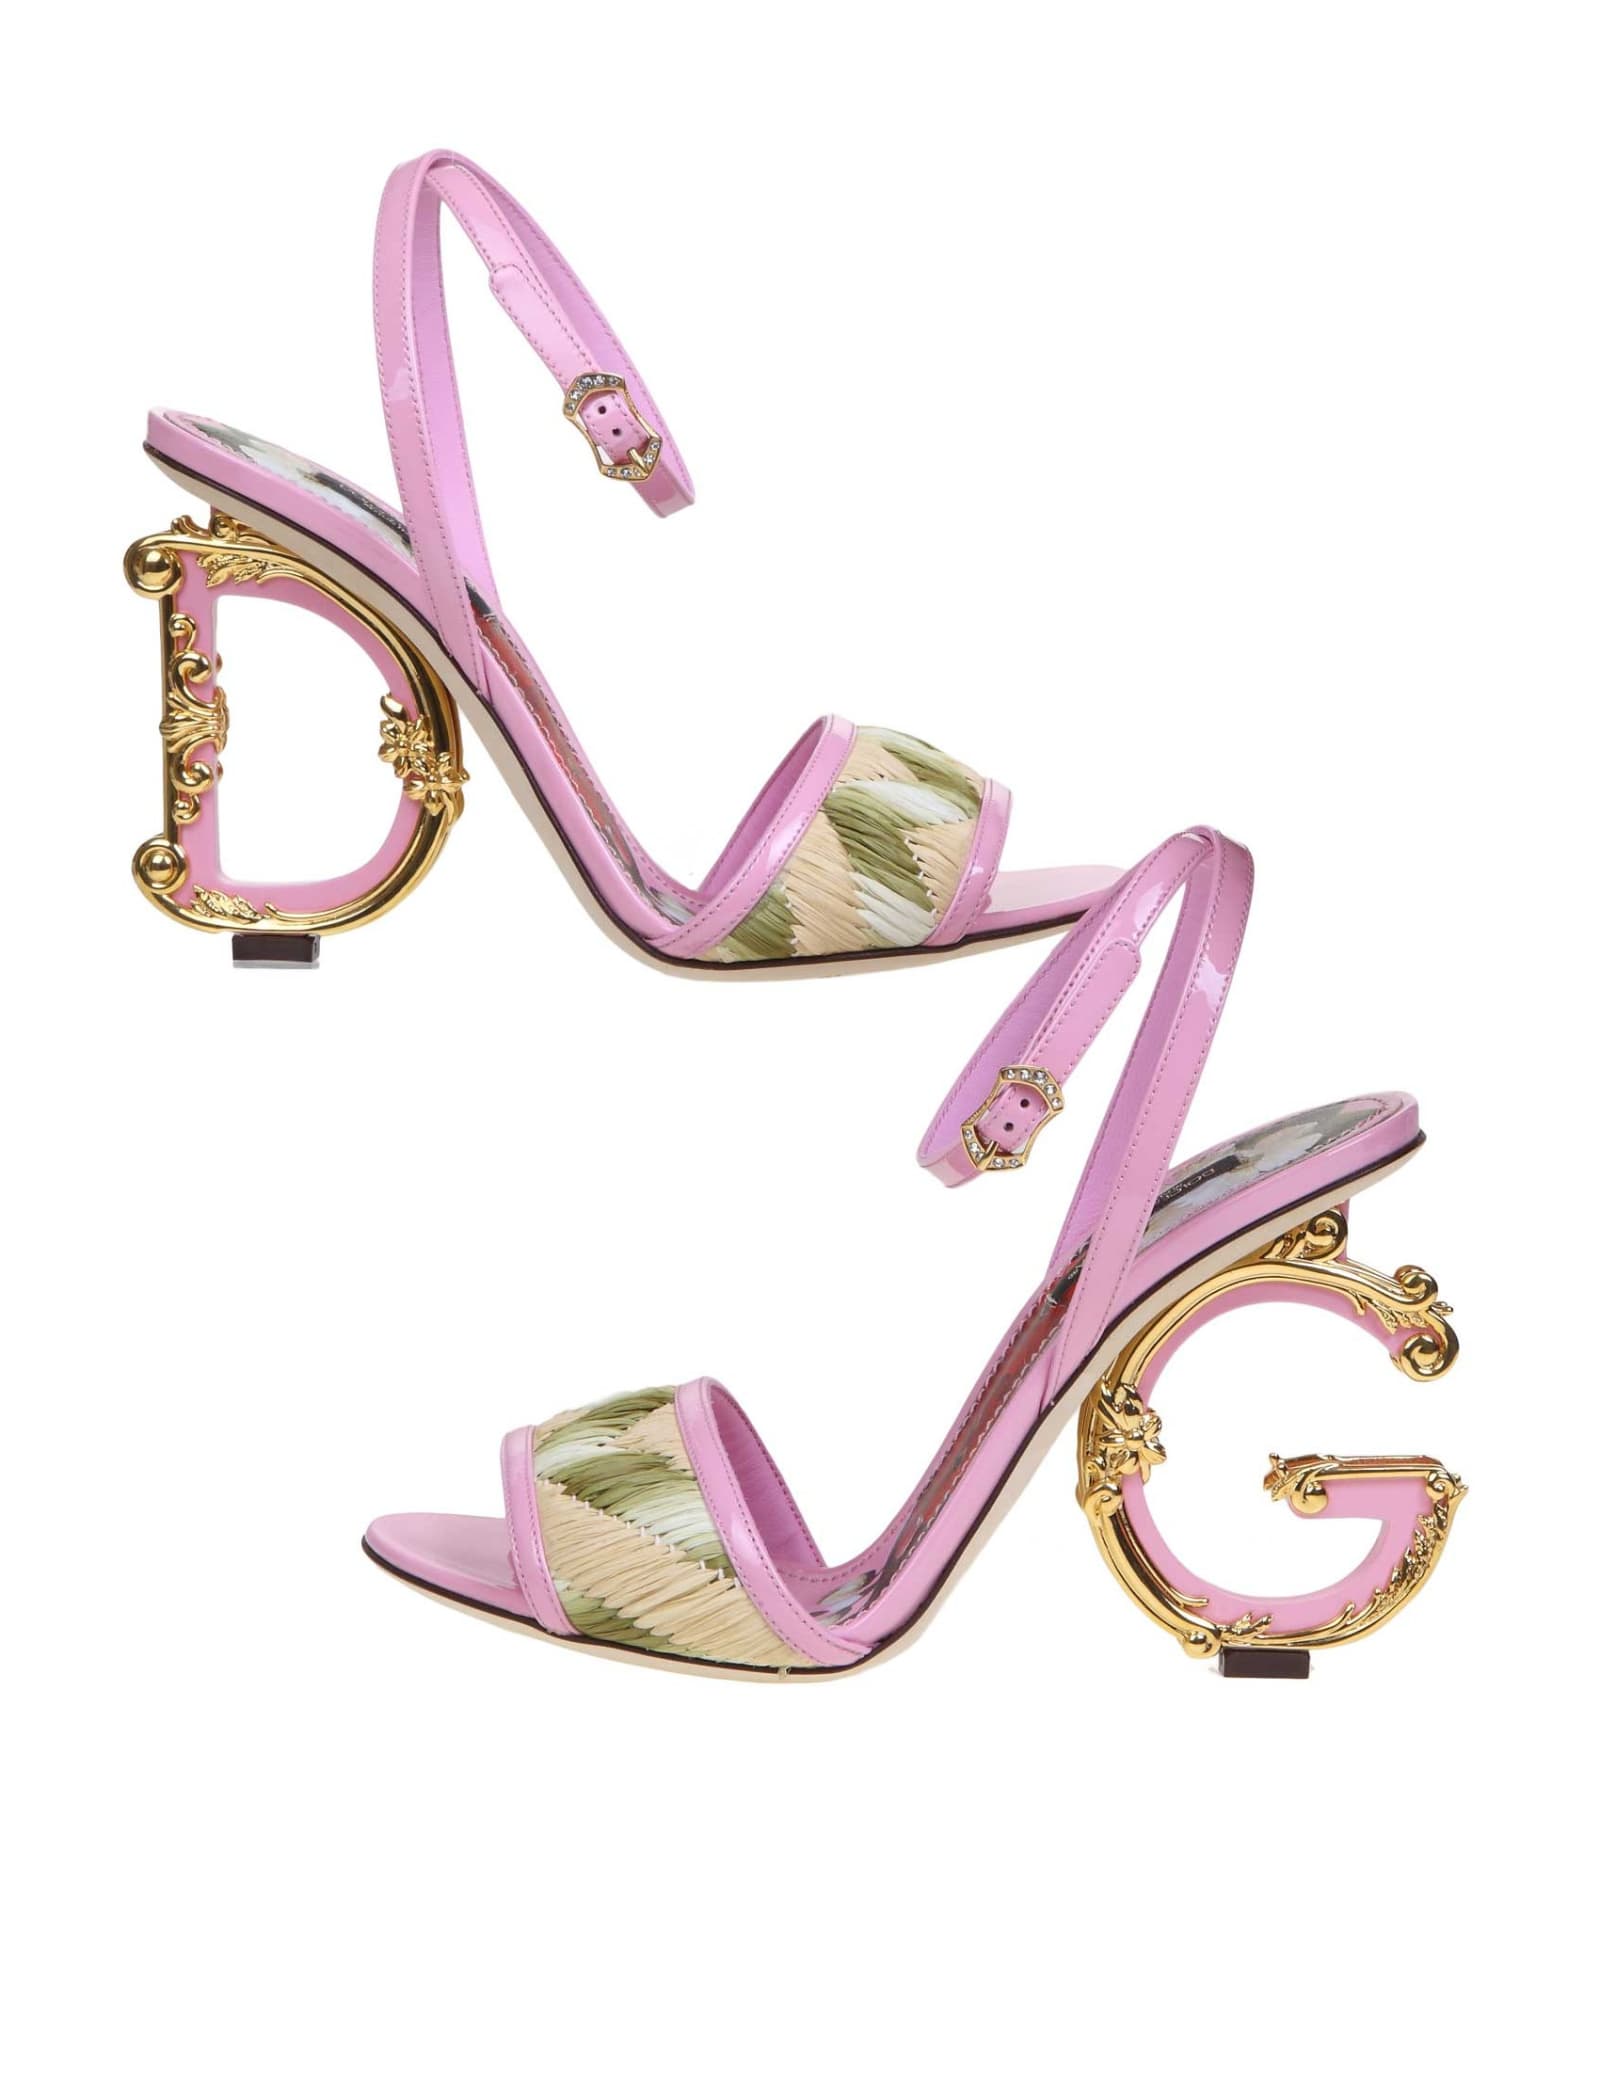 DOLCE & GABBANA KEIRA SANDAL IN PINK PAINT,11233302